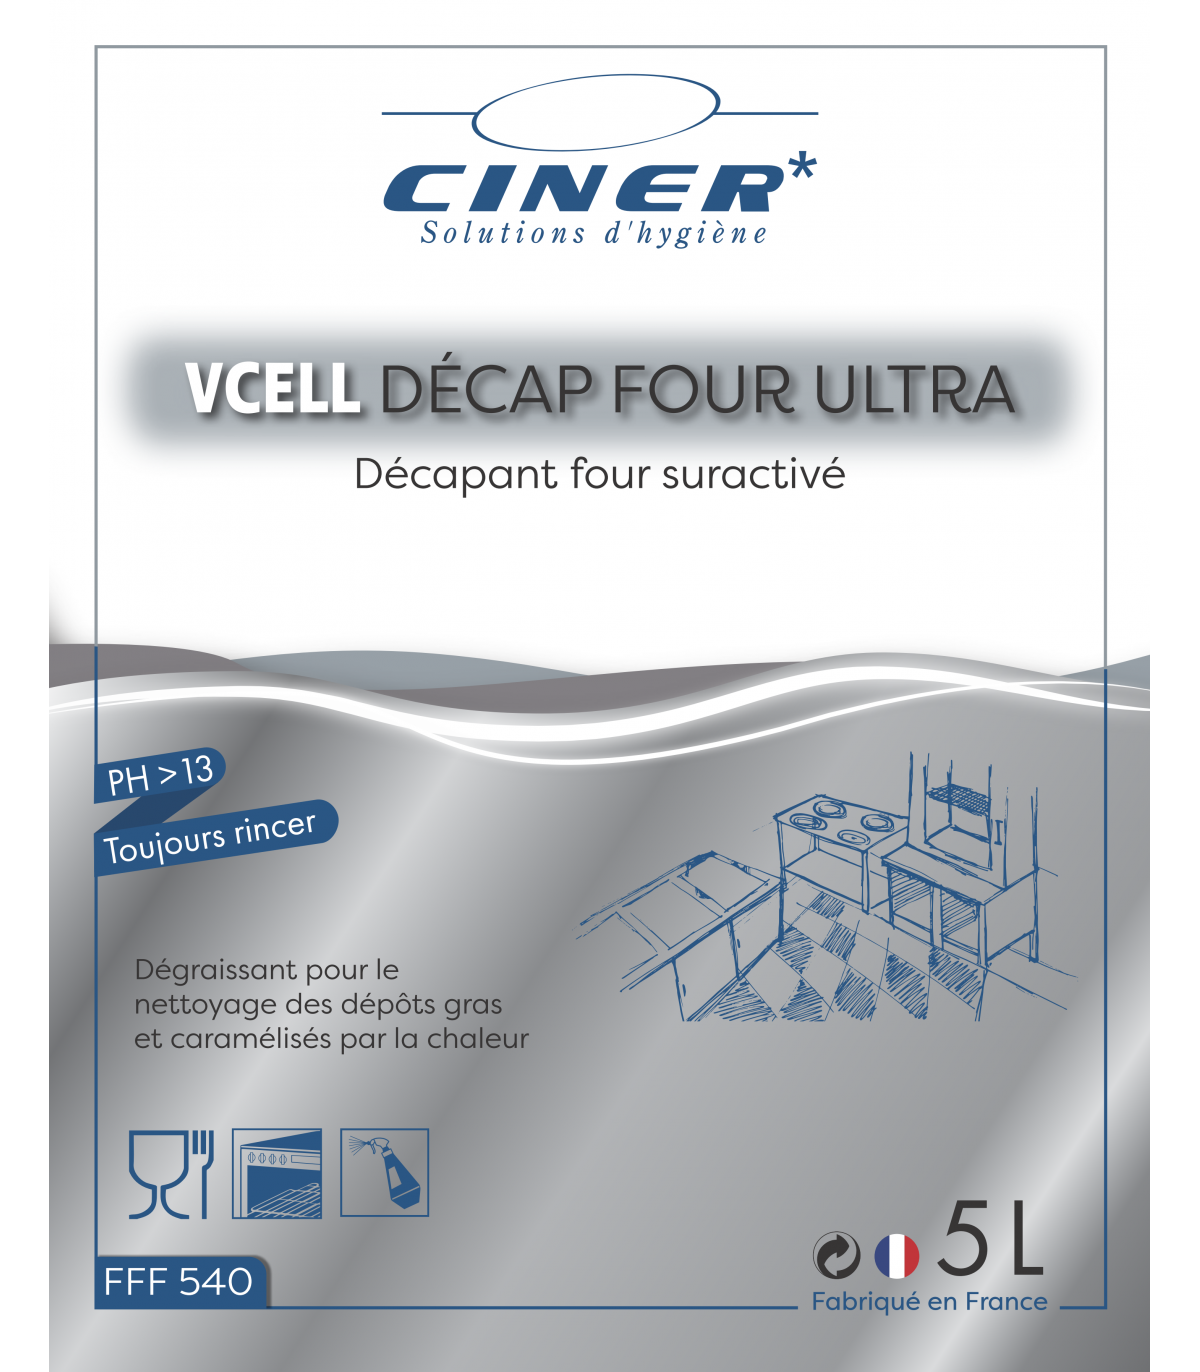 VCELL DECAP FOUR ULTRA